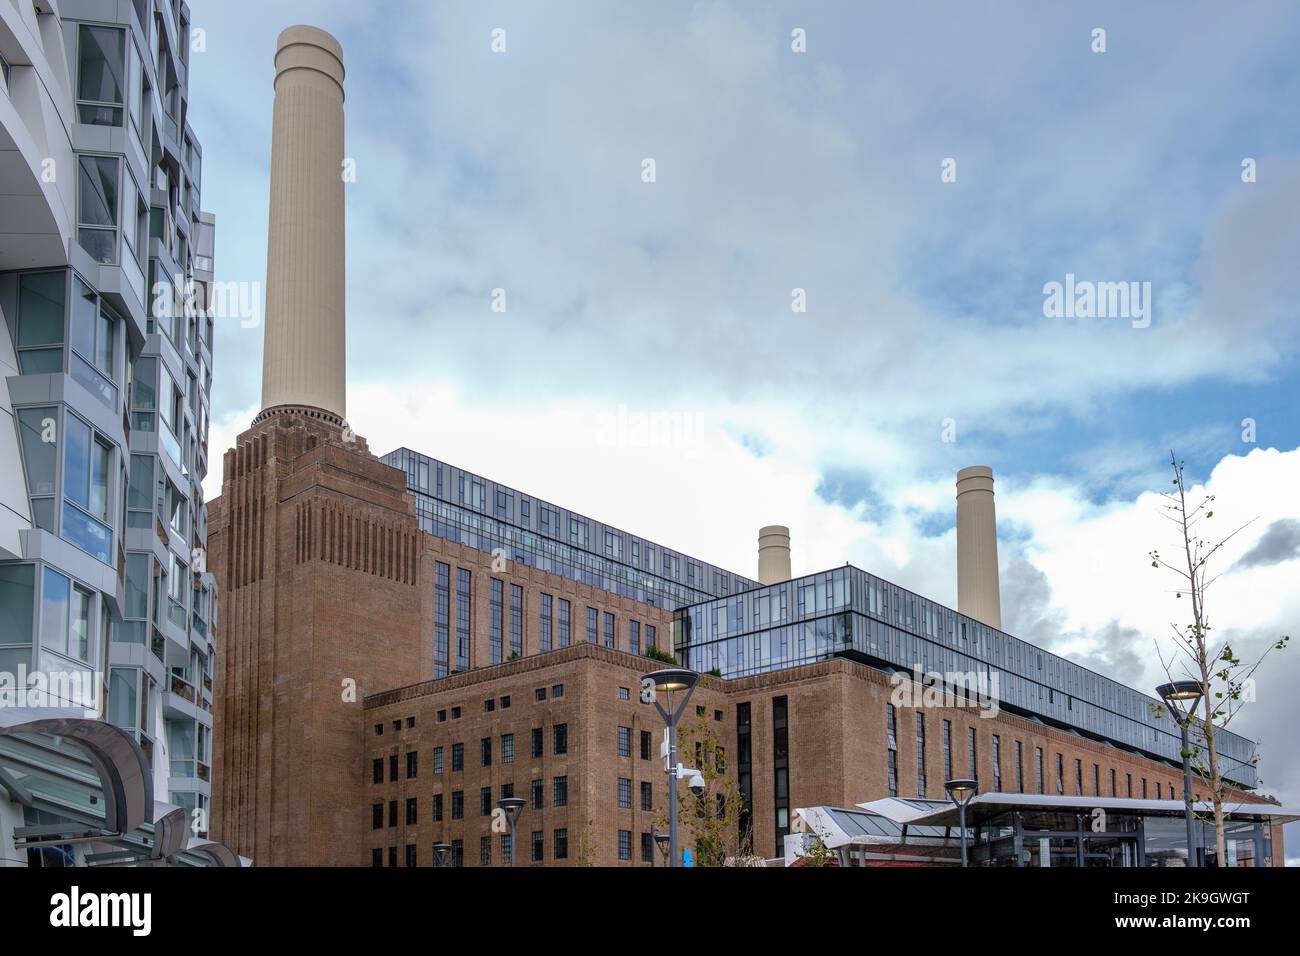 Refurbished Battersea Power Station with new residential building Prospect Place on the left. Stock Photo